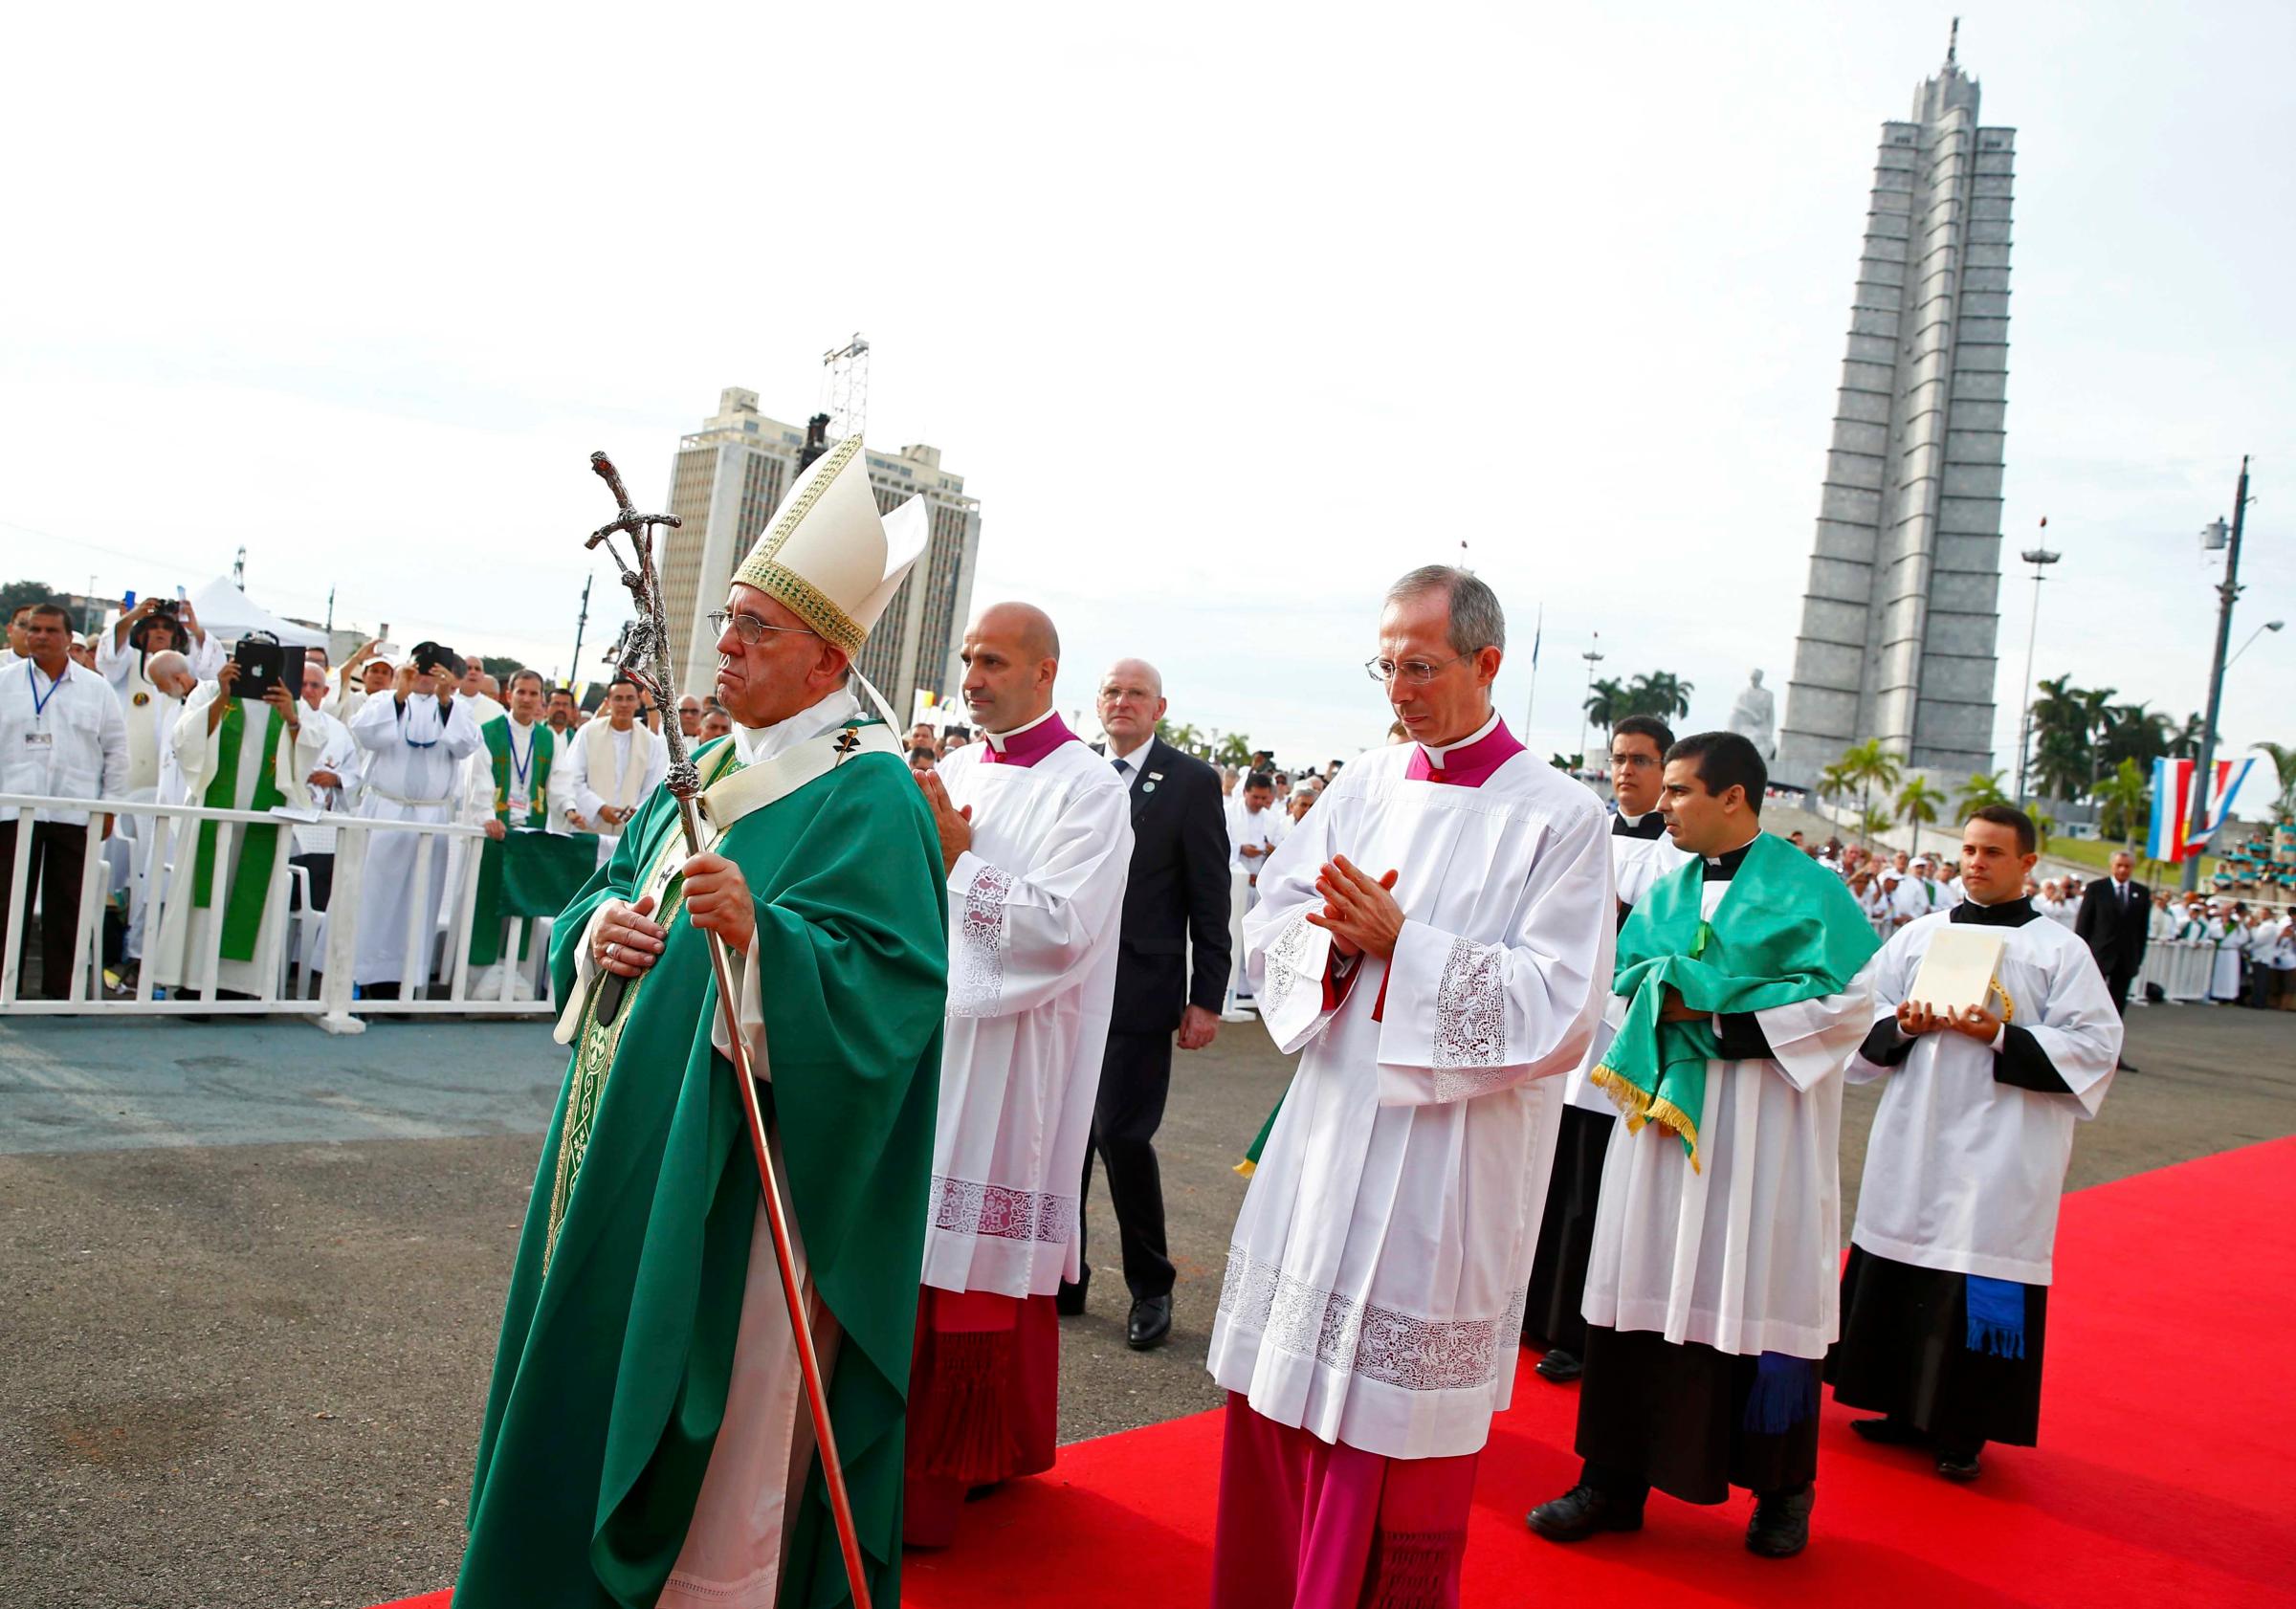 Pope Francis arrives for the first mass of his visit to Cuba in Havana's Revolution Square